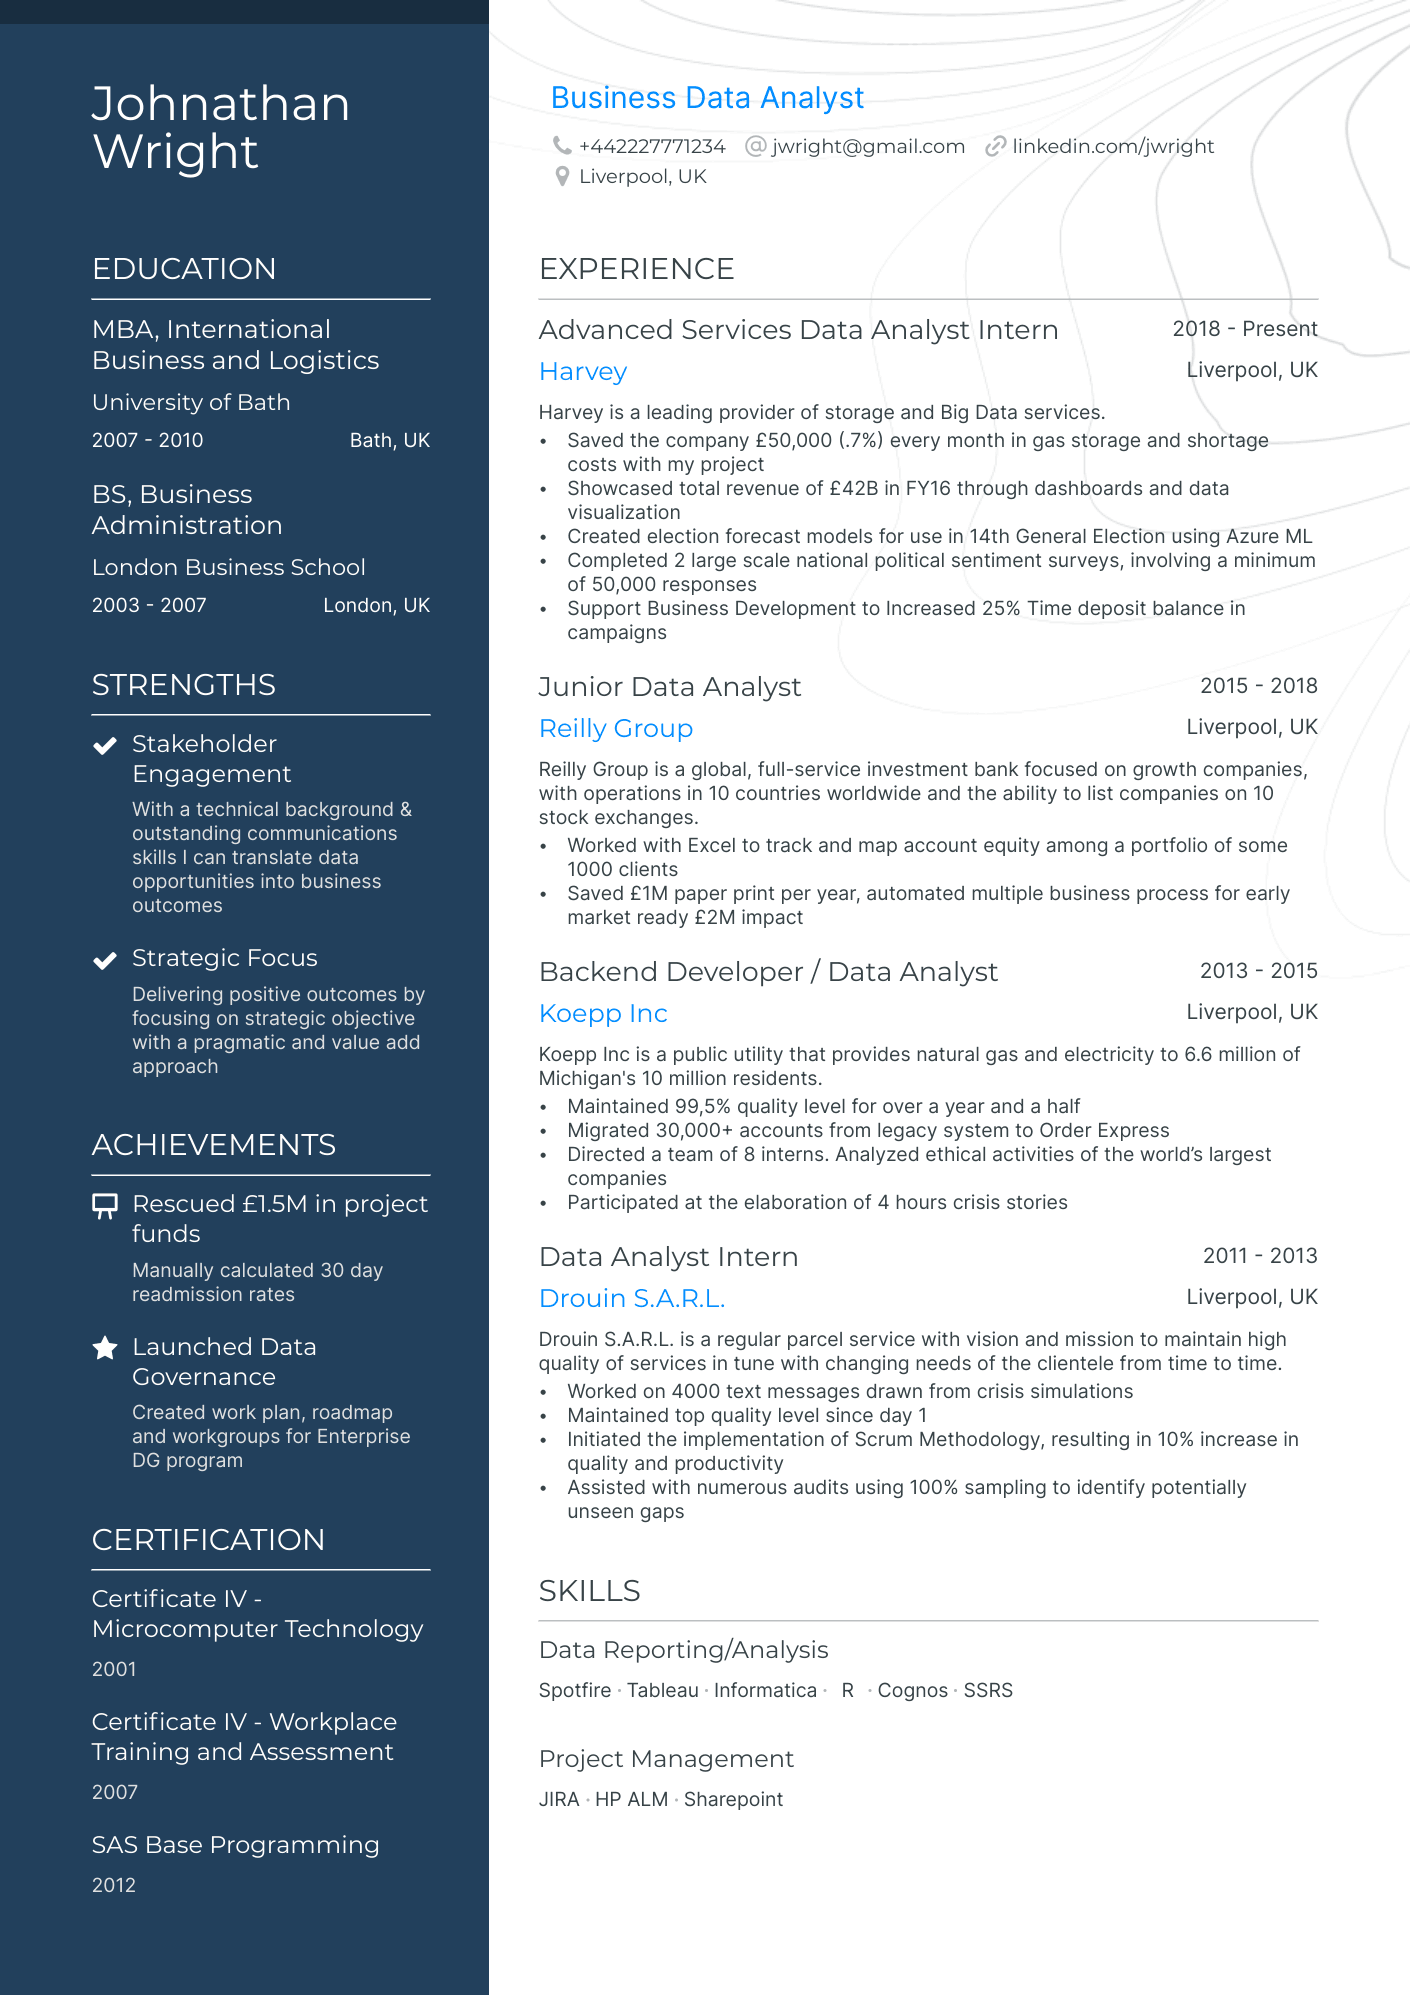 Business Data Analyst CV example